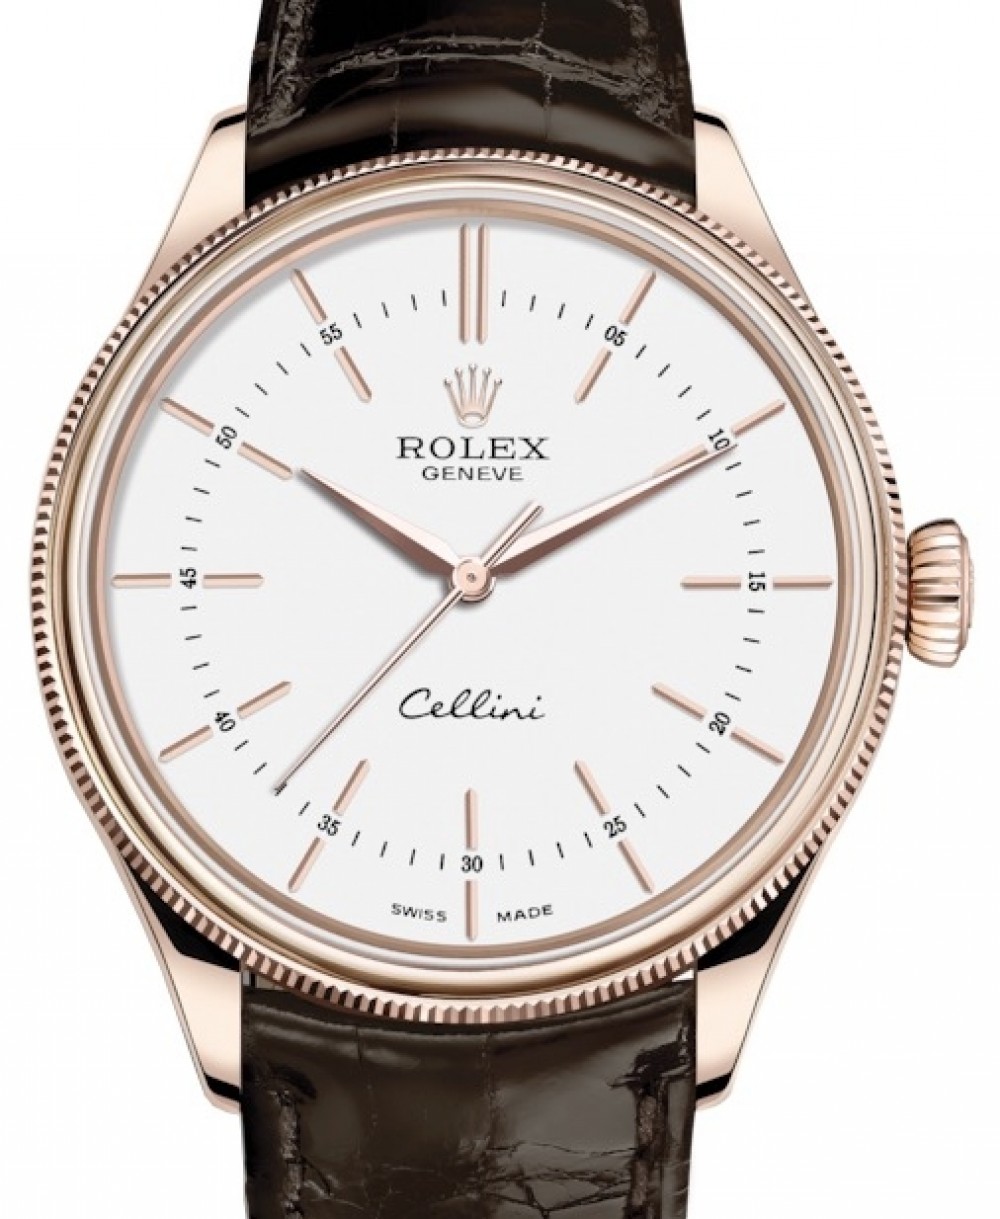 Rolex Cellini Time Rose Gold White Index Dial Domed & Fluted Double Bezel  Tobacco Leather Bracelet 50505 - BRAND NEW